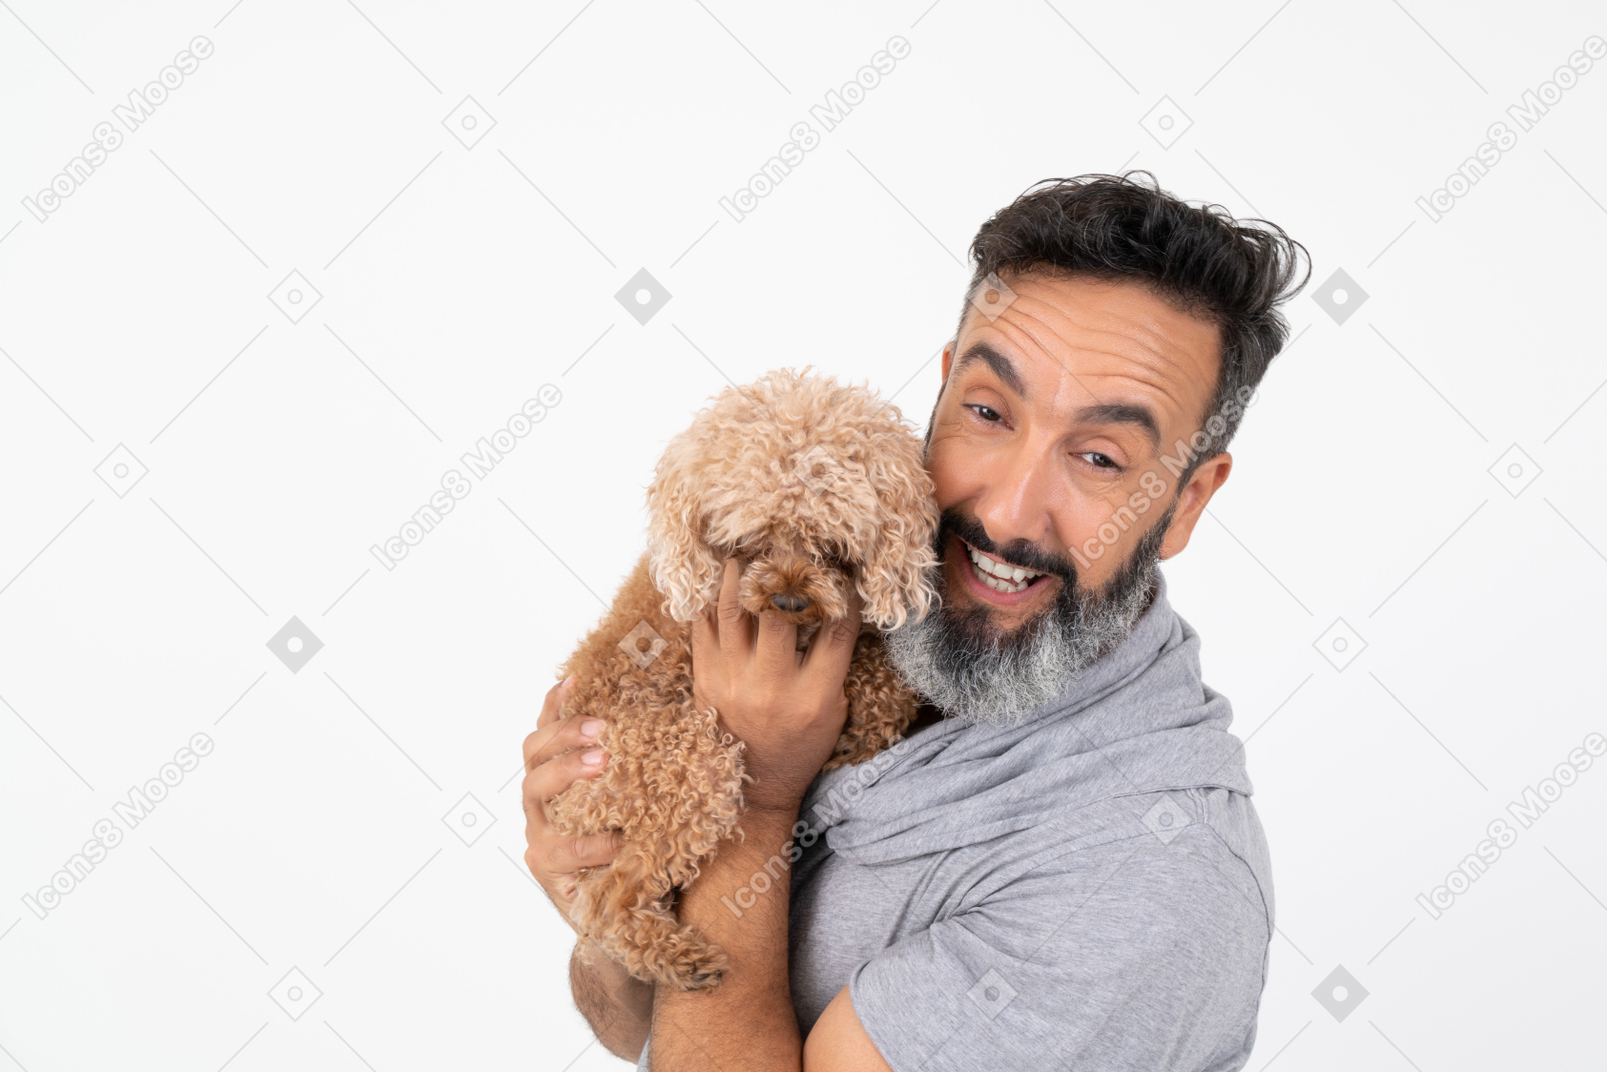 Happy  man holding a puppy